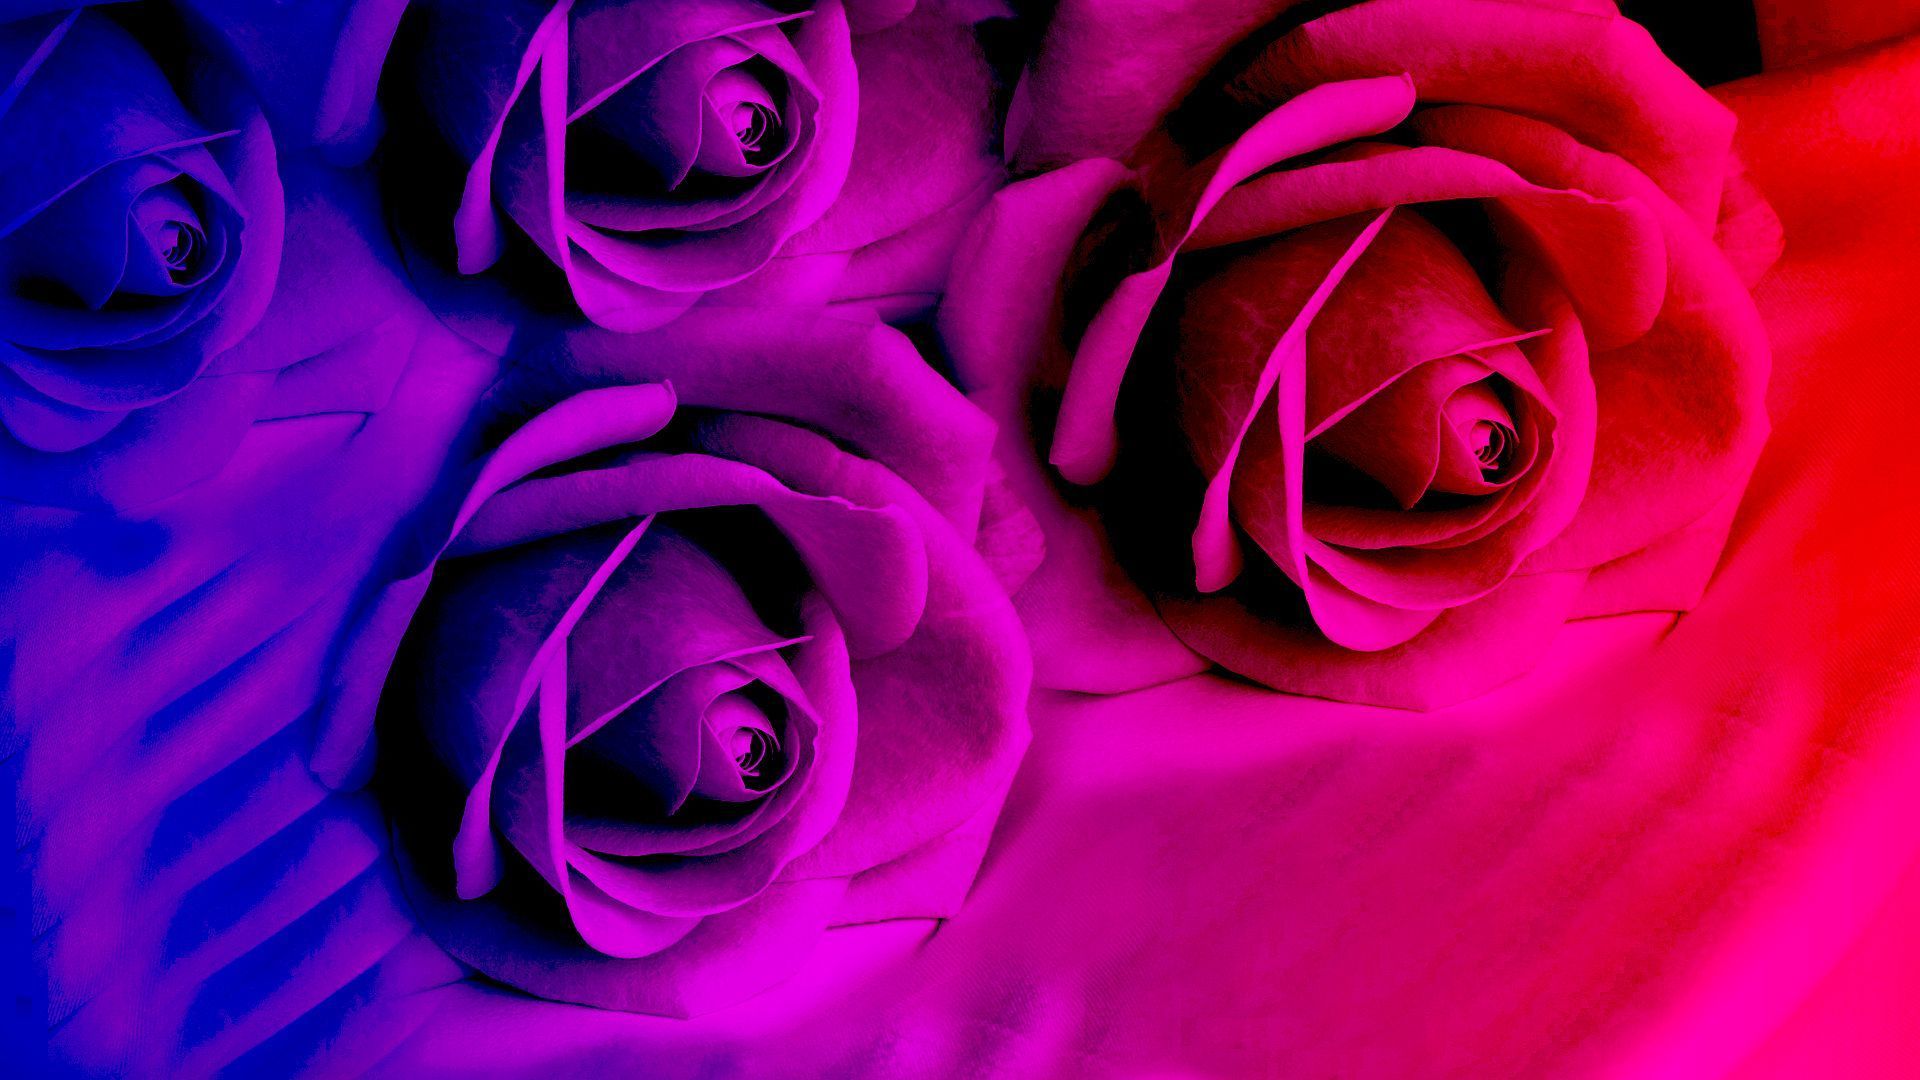 Pink I Love You Live Wallpaper Free Download Of Android - Violet Color  Wallpaper Hd - 1920x1080 Wallpaper 